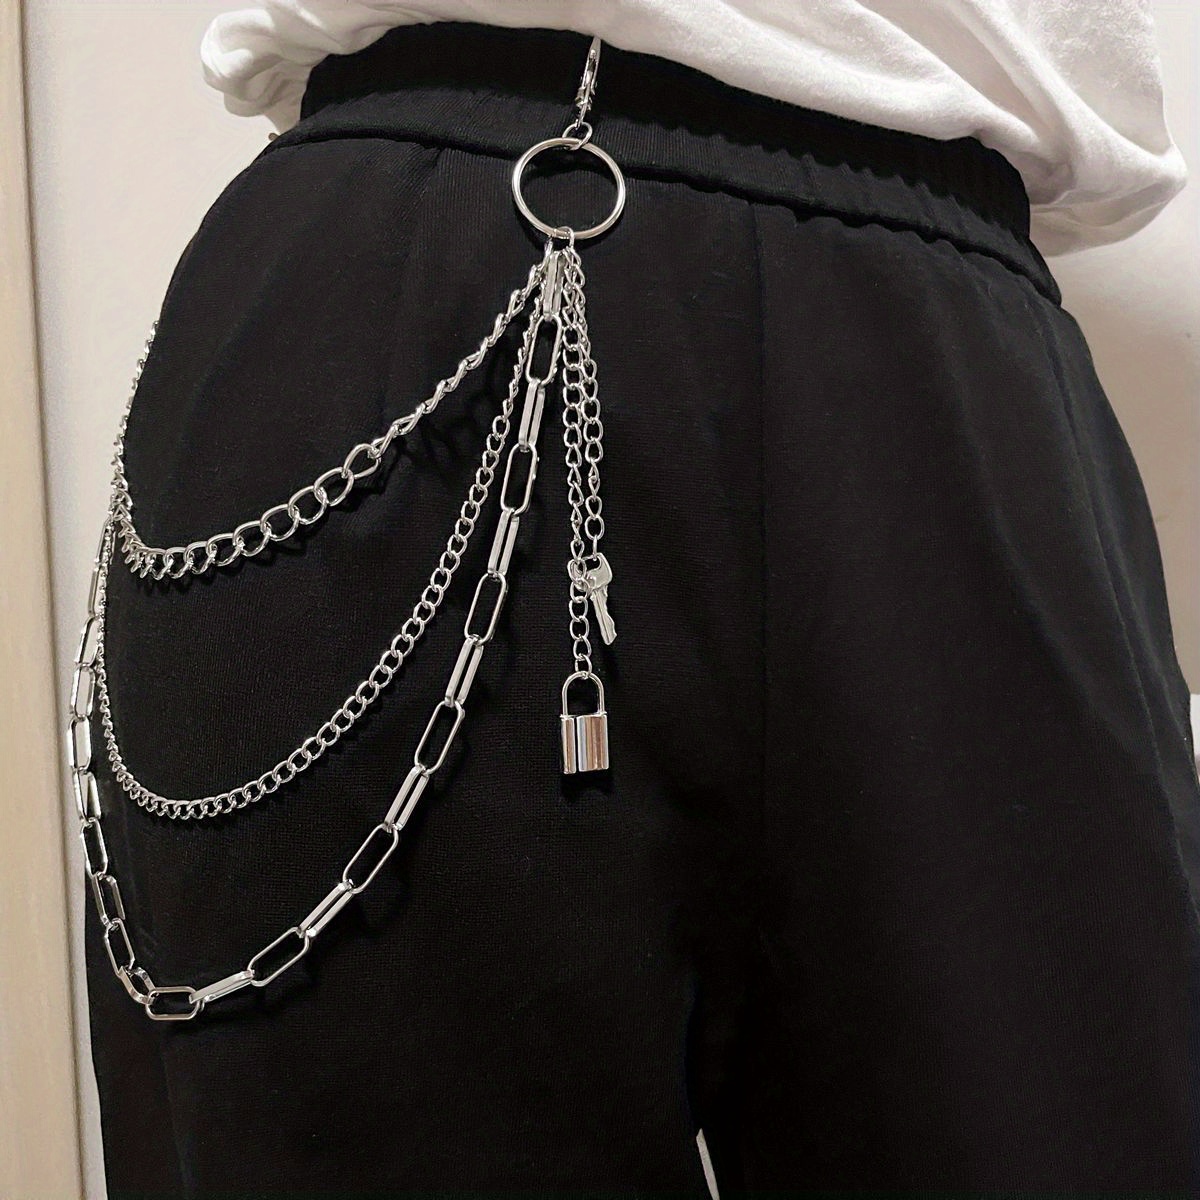 Long Steel Solid Pants Chain for Keys for Jeans and Trousers With